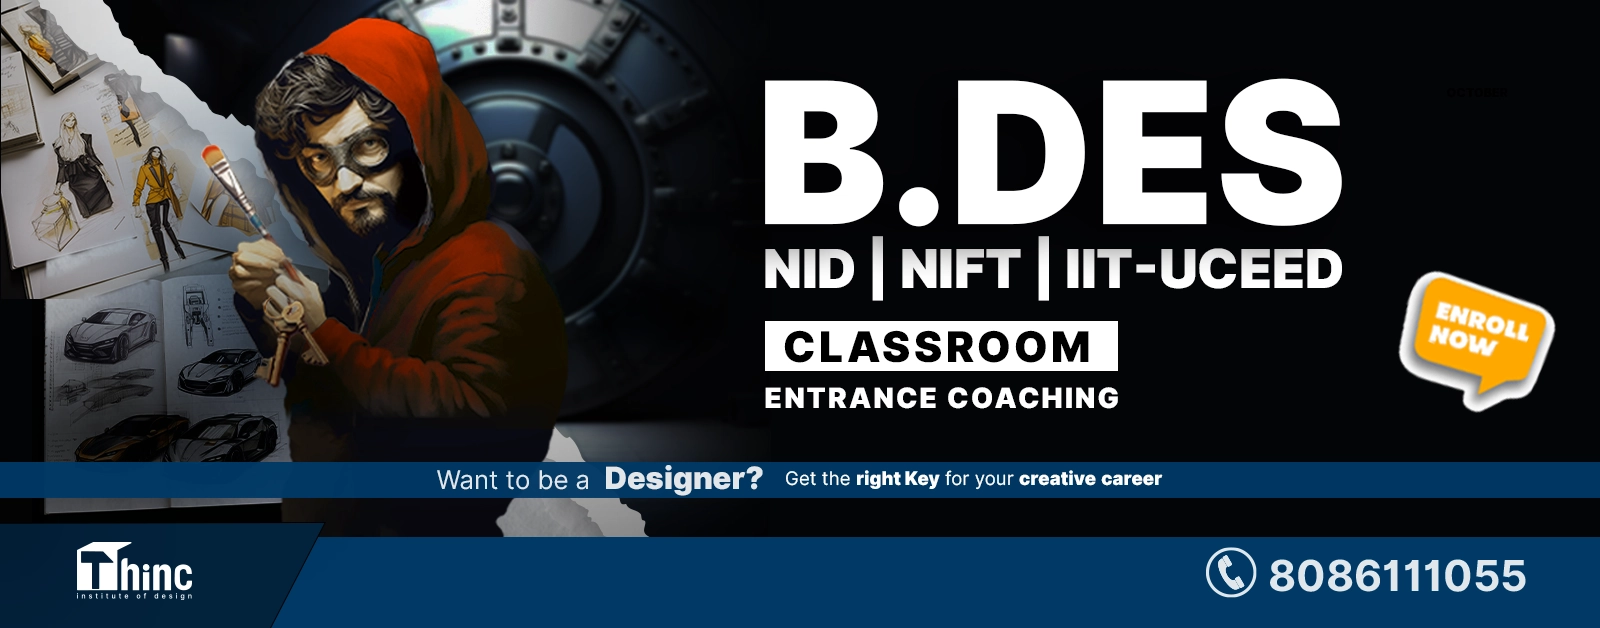 NIFT UCEED NID Entrance coaching banner